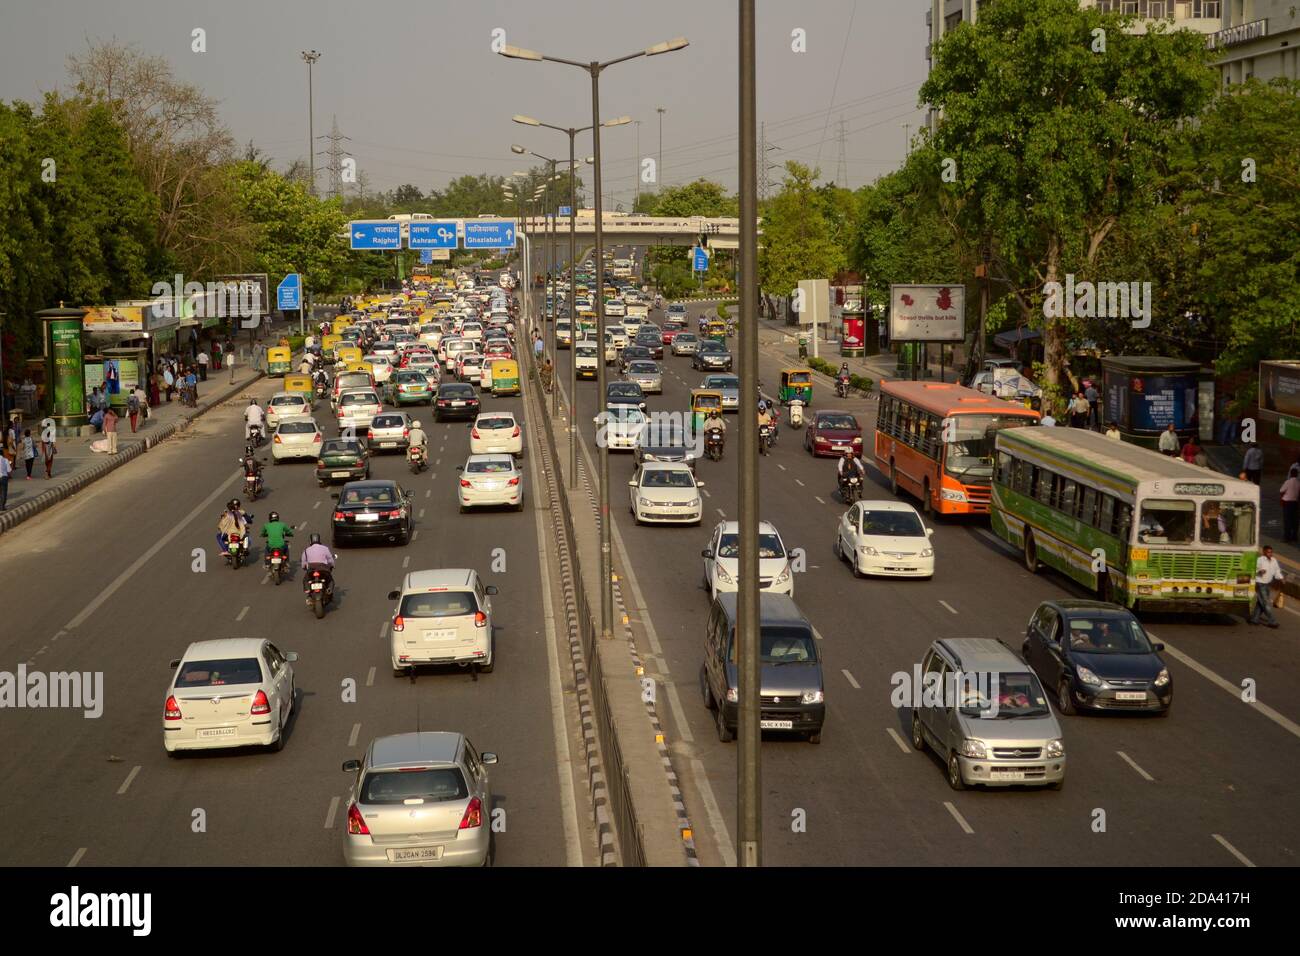 Delhi, India - April, 2014: Traffic jam on the road with cars, buses and other vehicles in rush hour Stock Photo